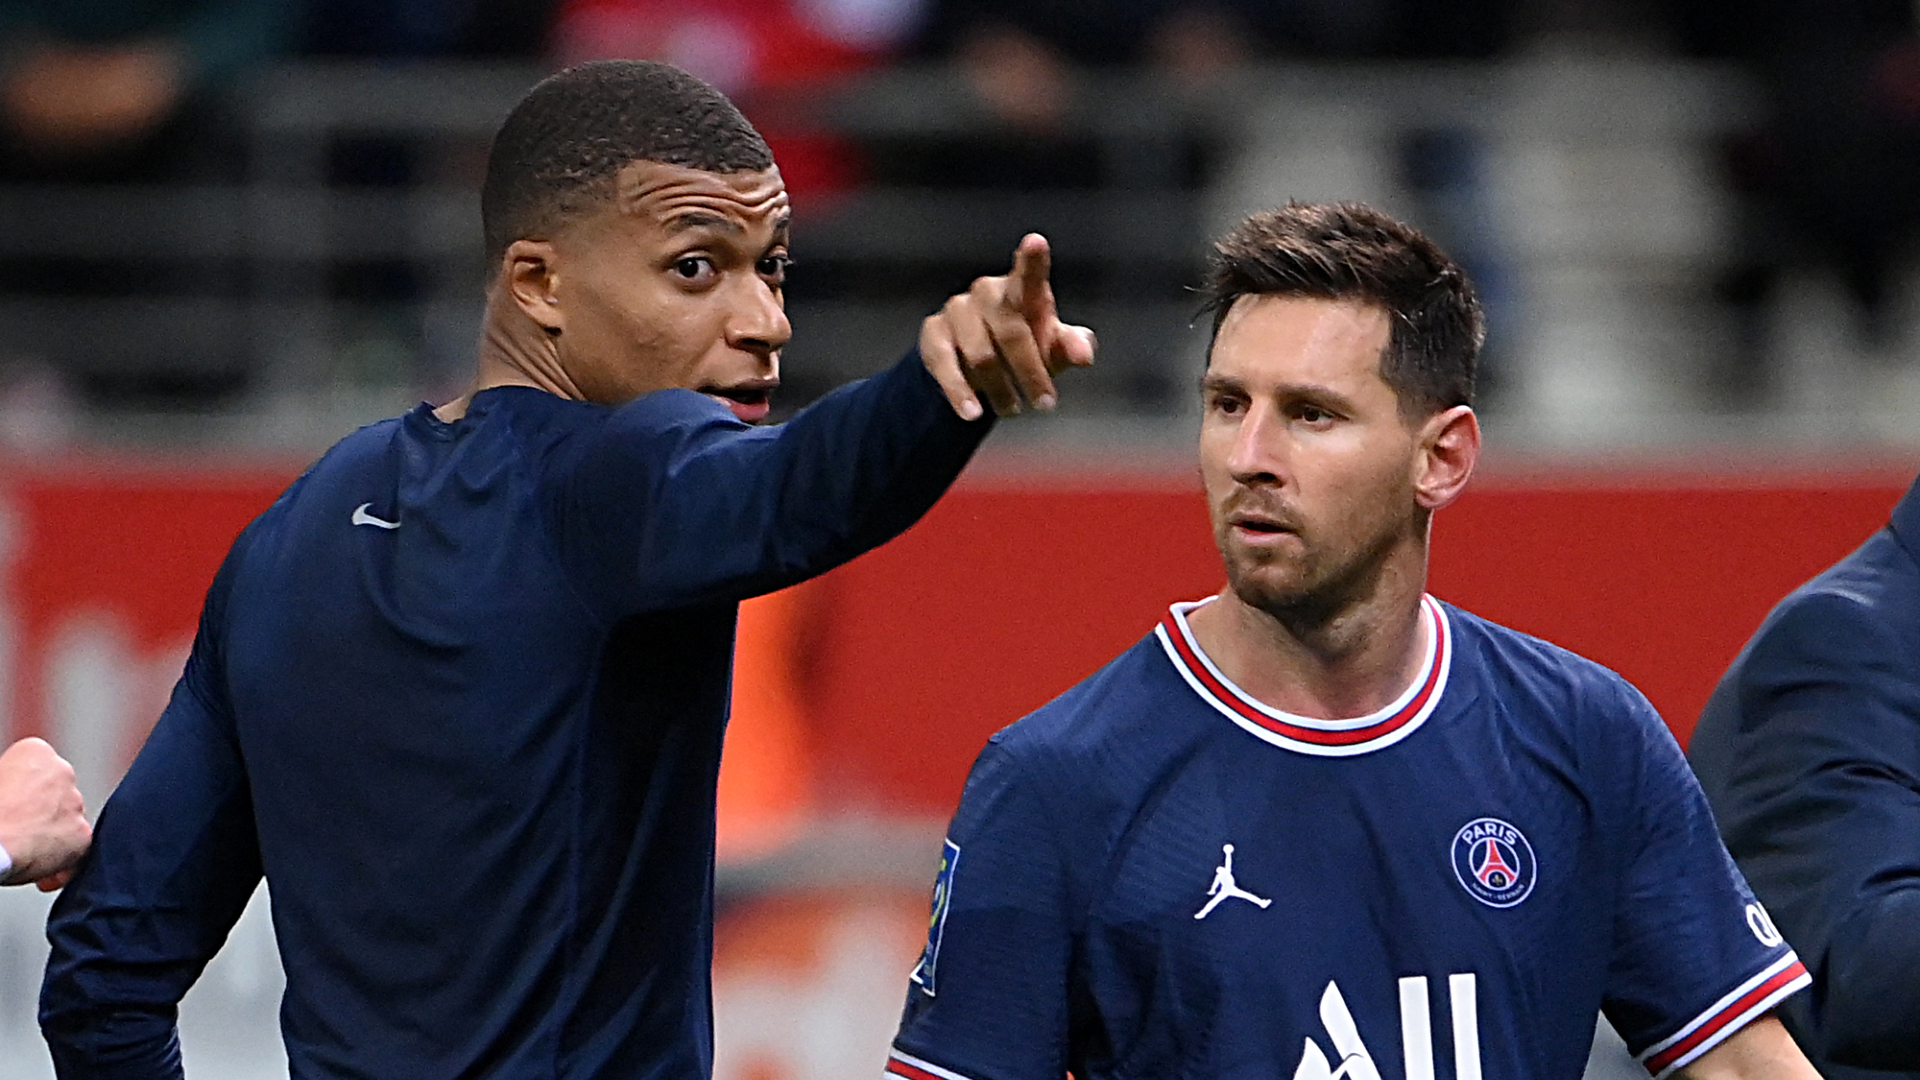 kylian-mbappe-cracks-lionel-messis-champions-league-record-in-psg_t34s.jpg